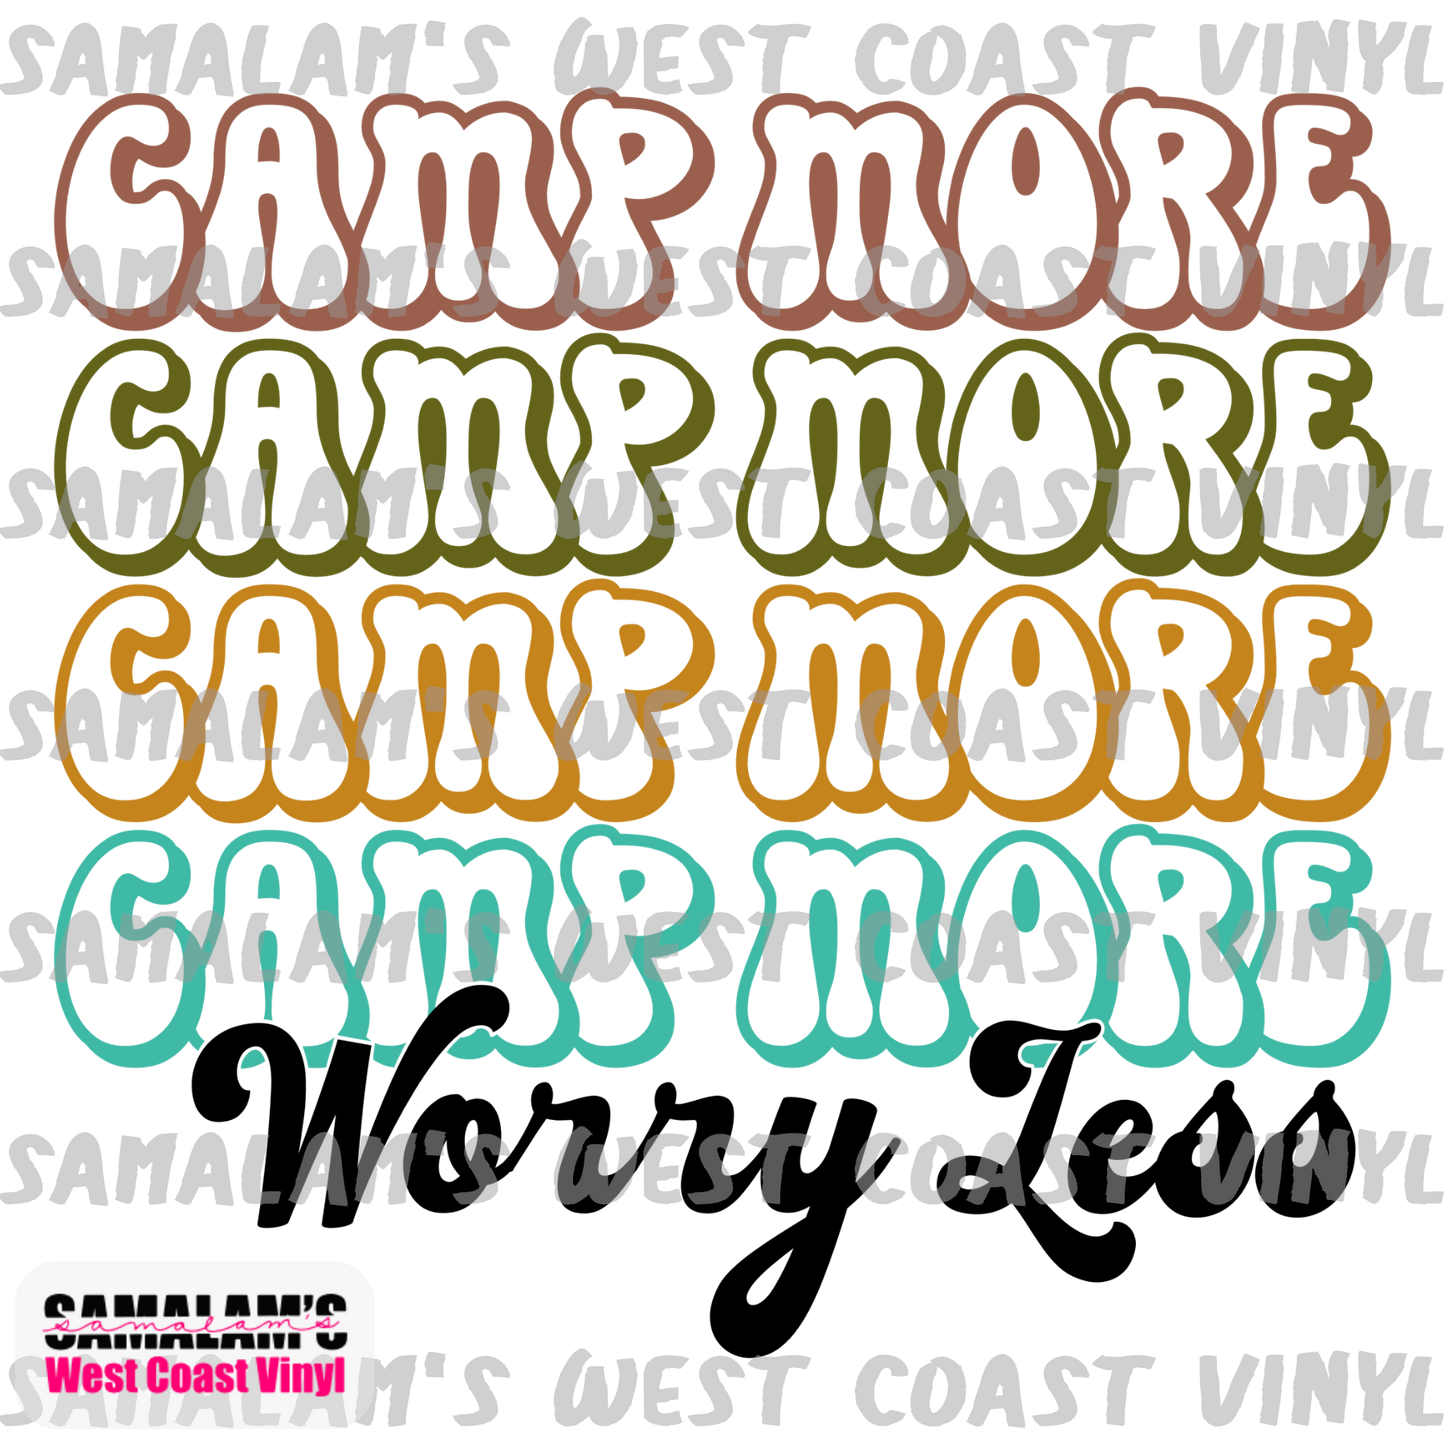 Camp More Worry Less - Clear Cast Decal